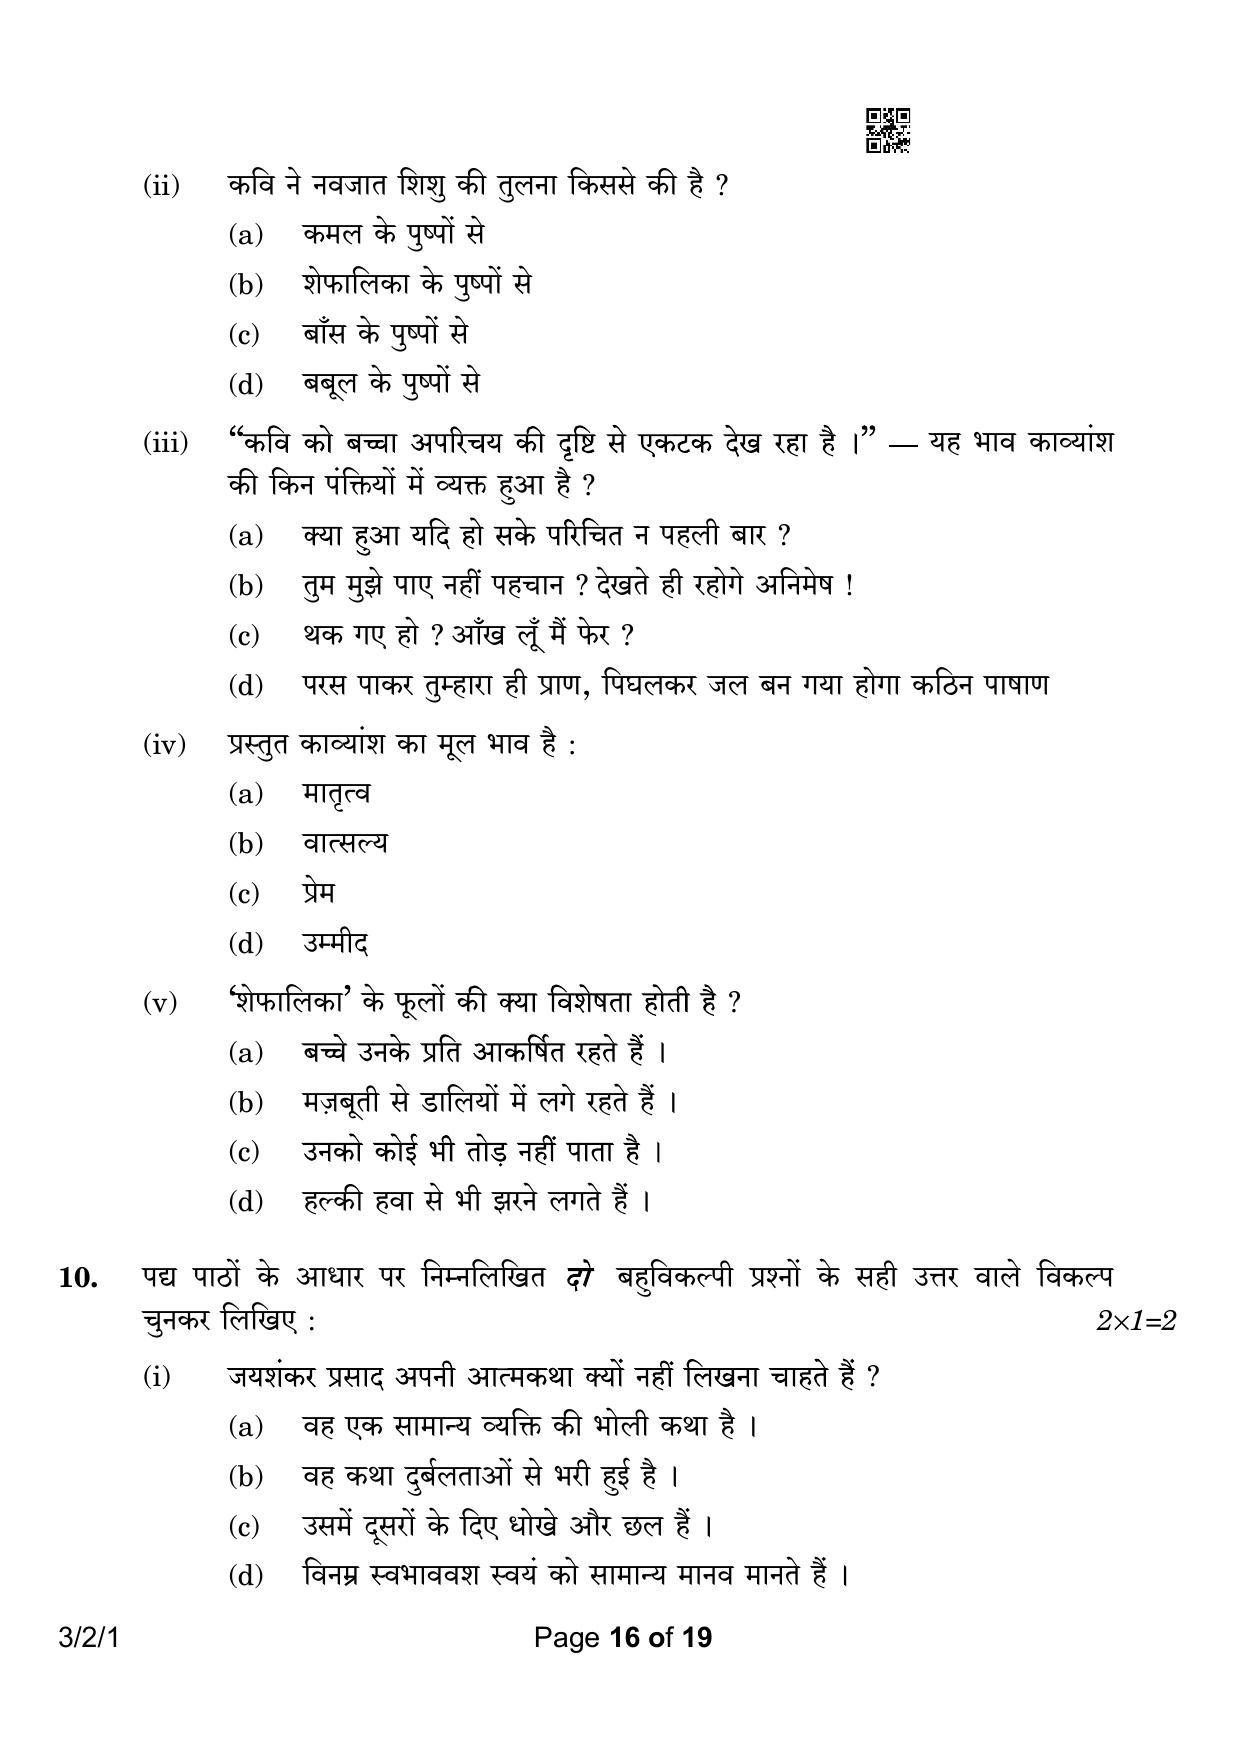 CBSE Class 10 3-2-1 Hindi A 2023 Question Paper - Page 16